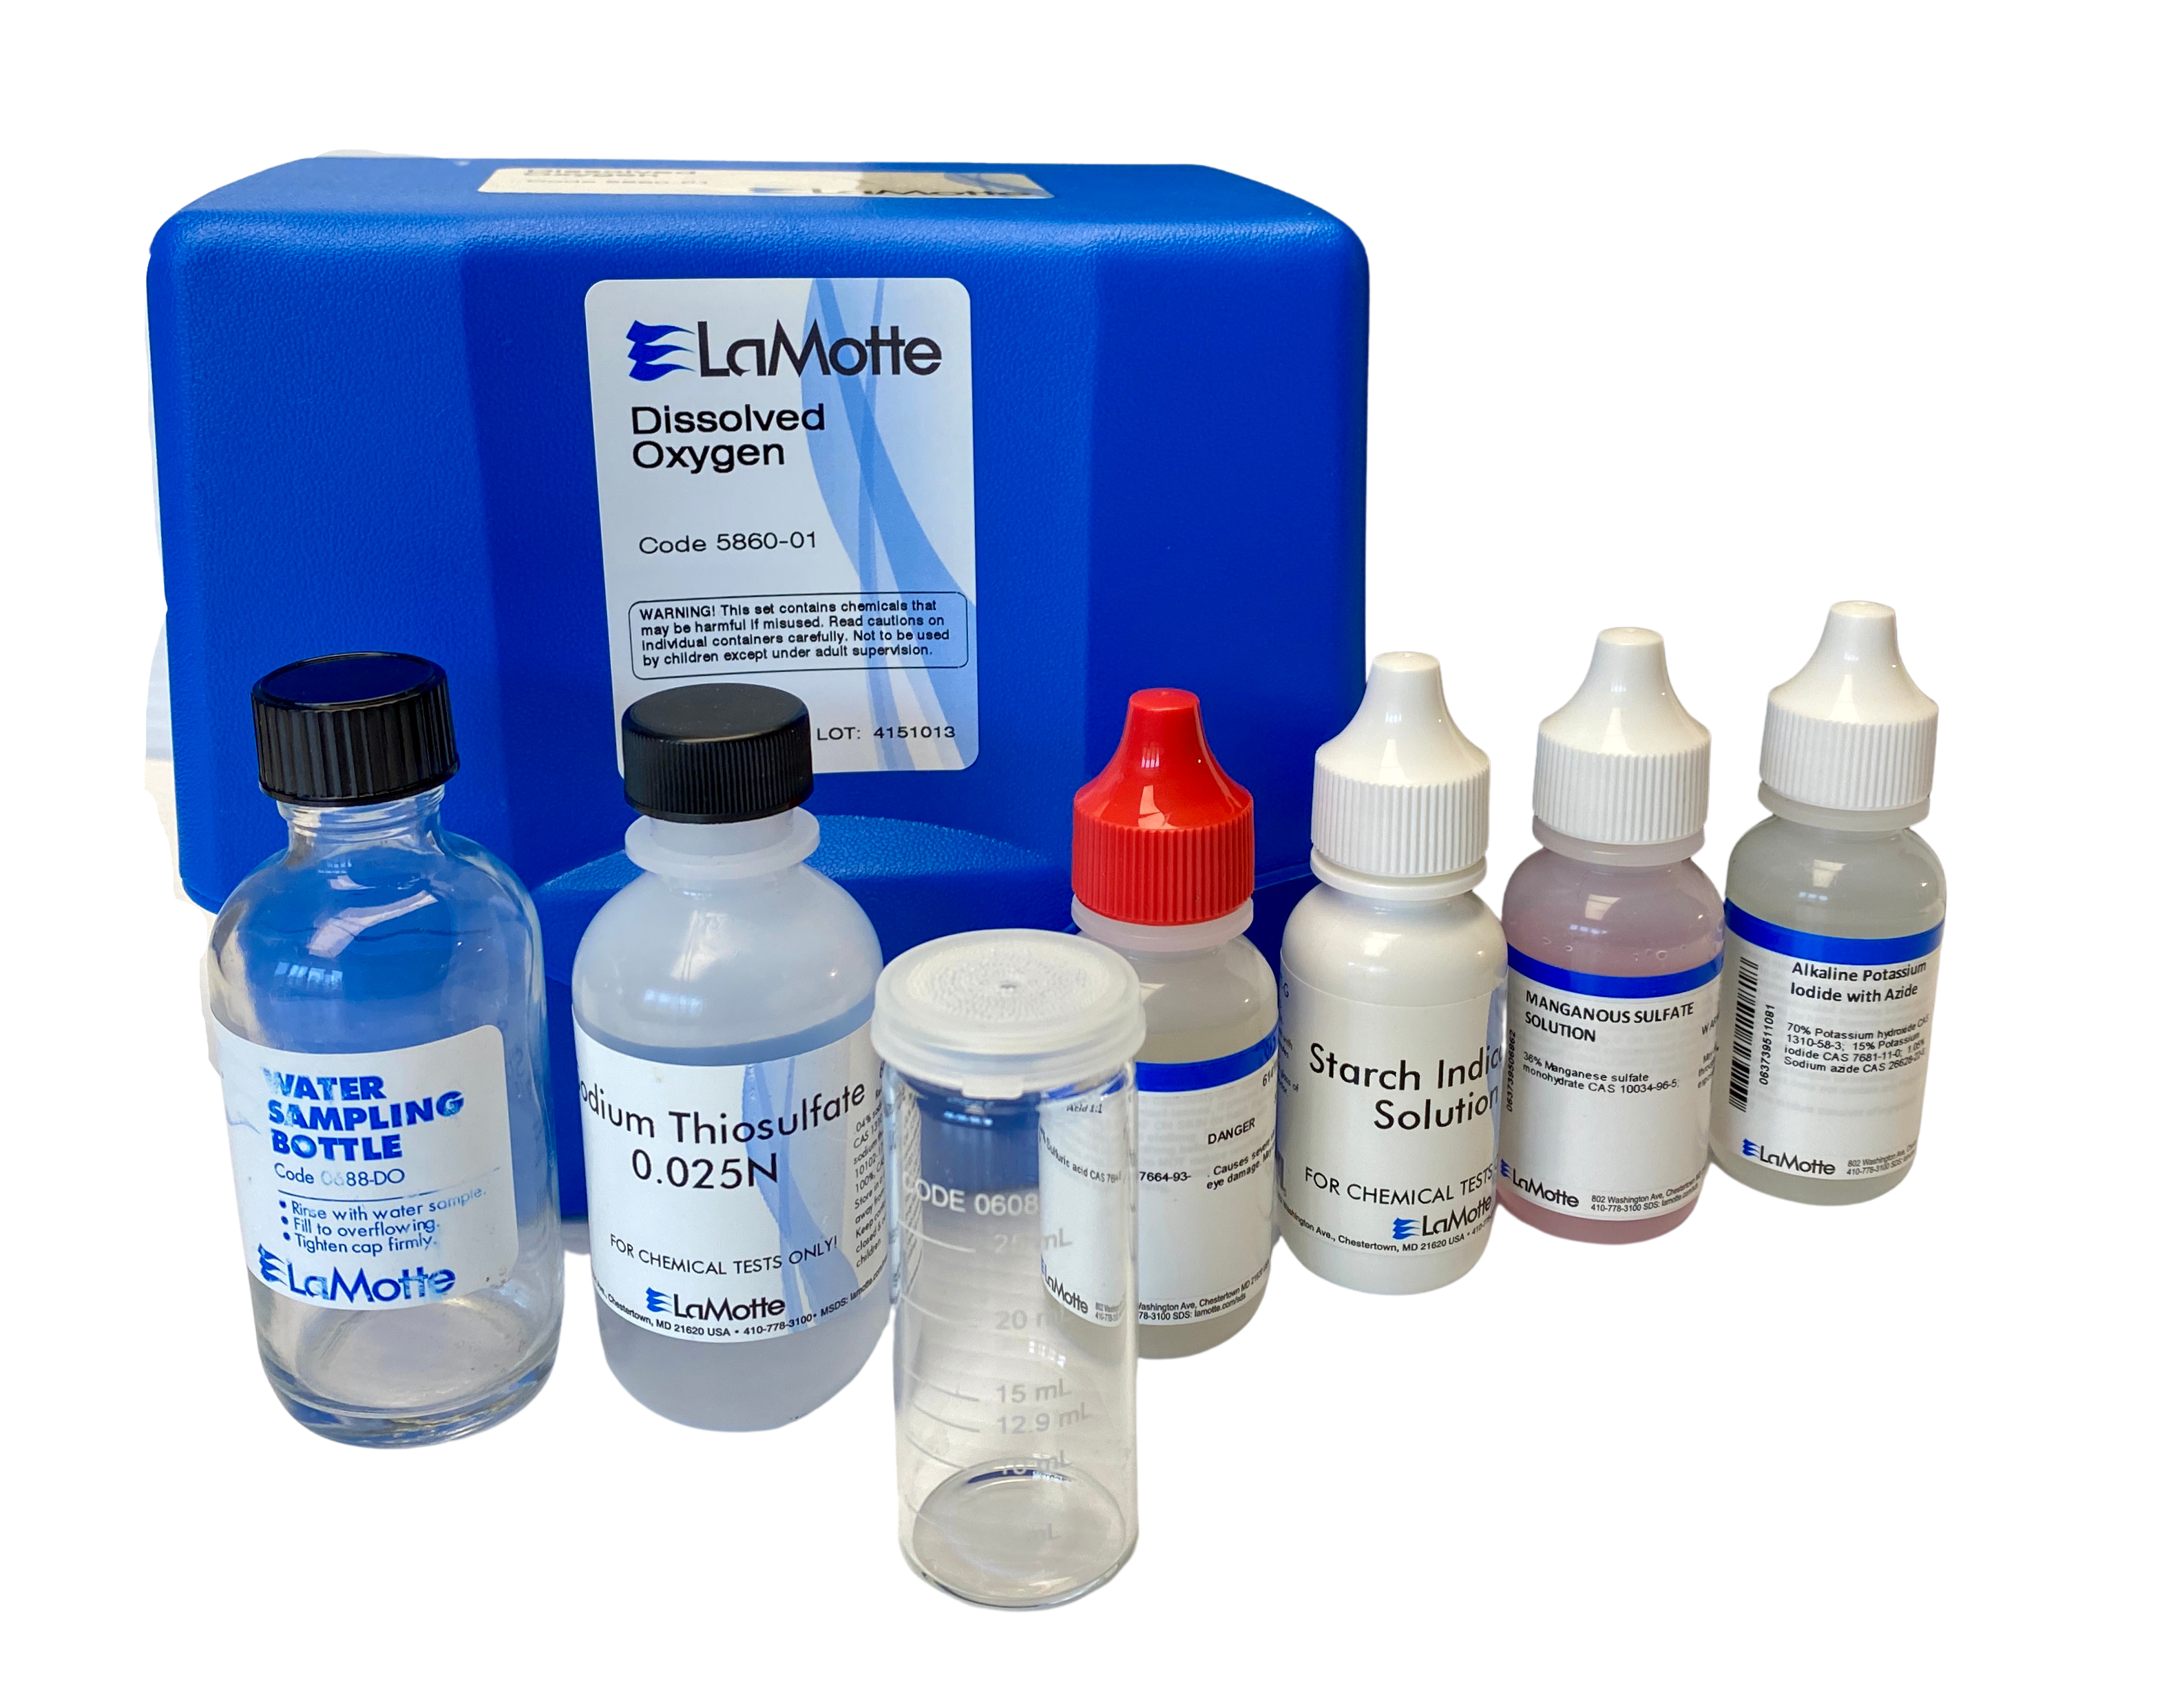 A photo of LaMotte's 5860-01 Test Kit for Dissolved Oxygen